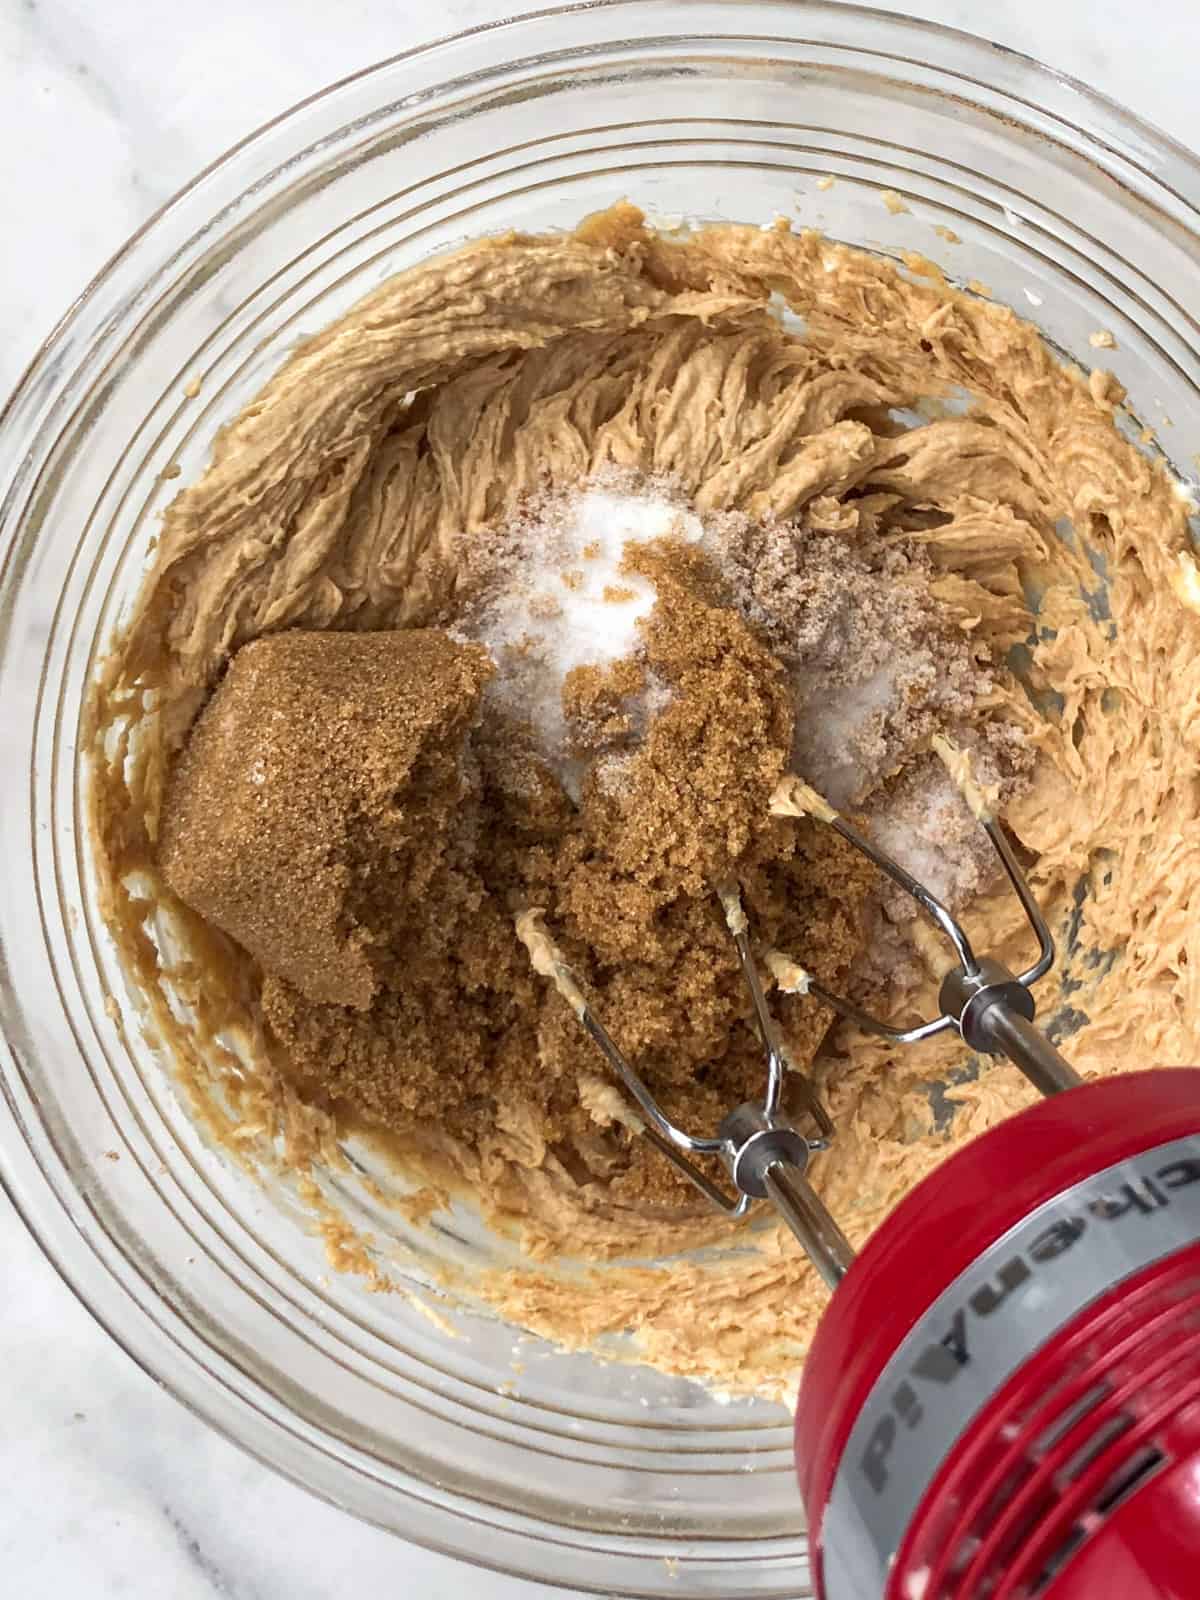 Peanut butter cookie ingredients being mixed in bowl with hand blender.